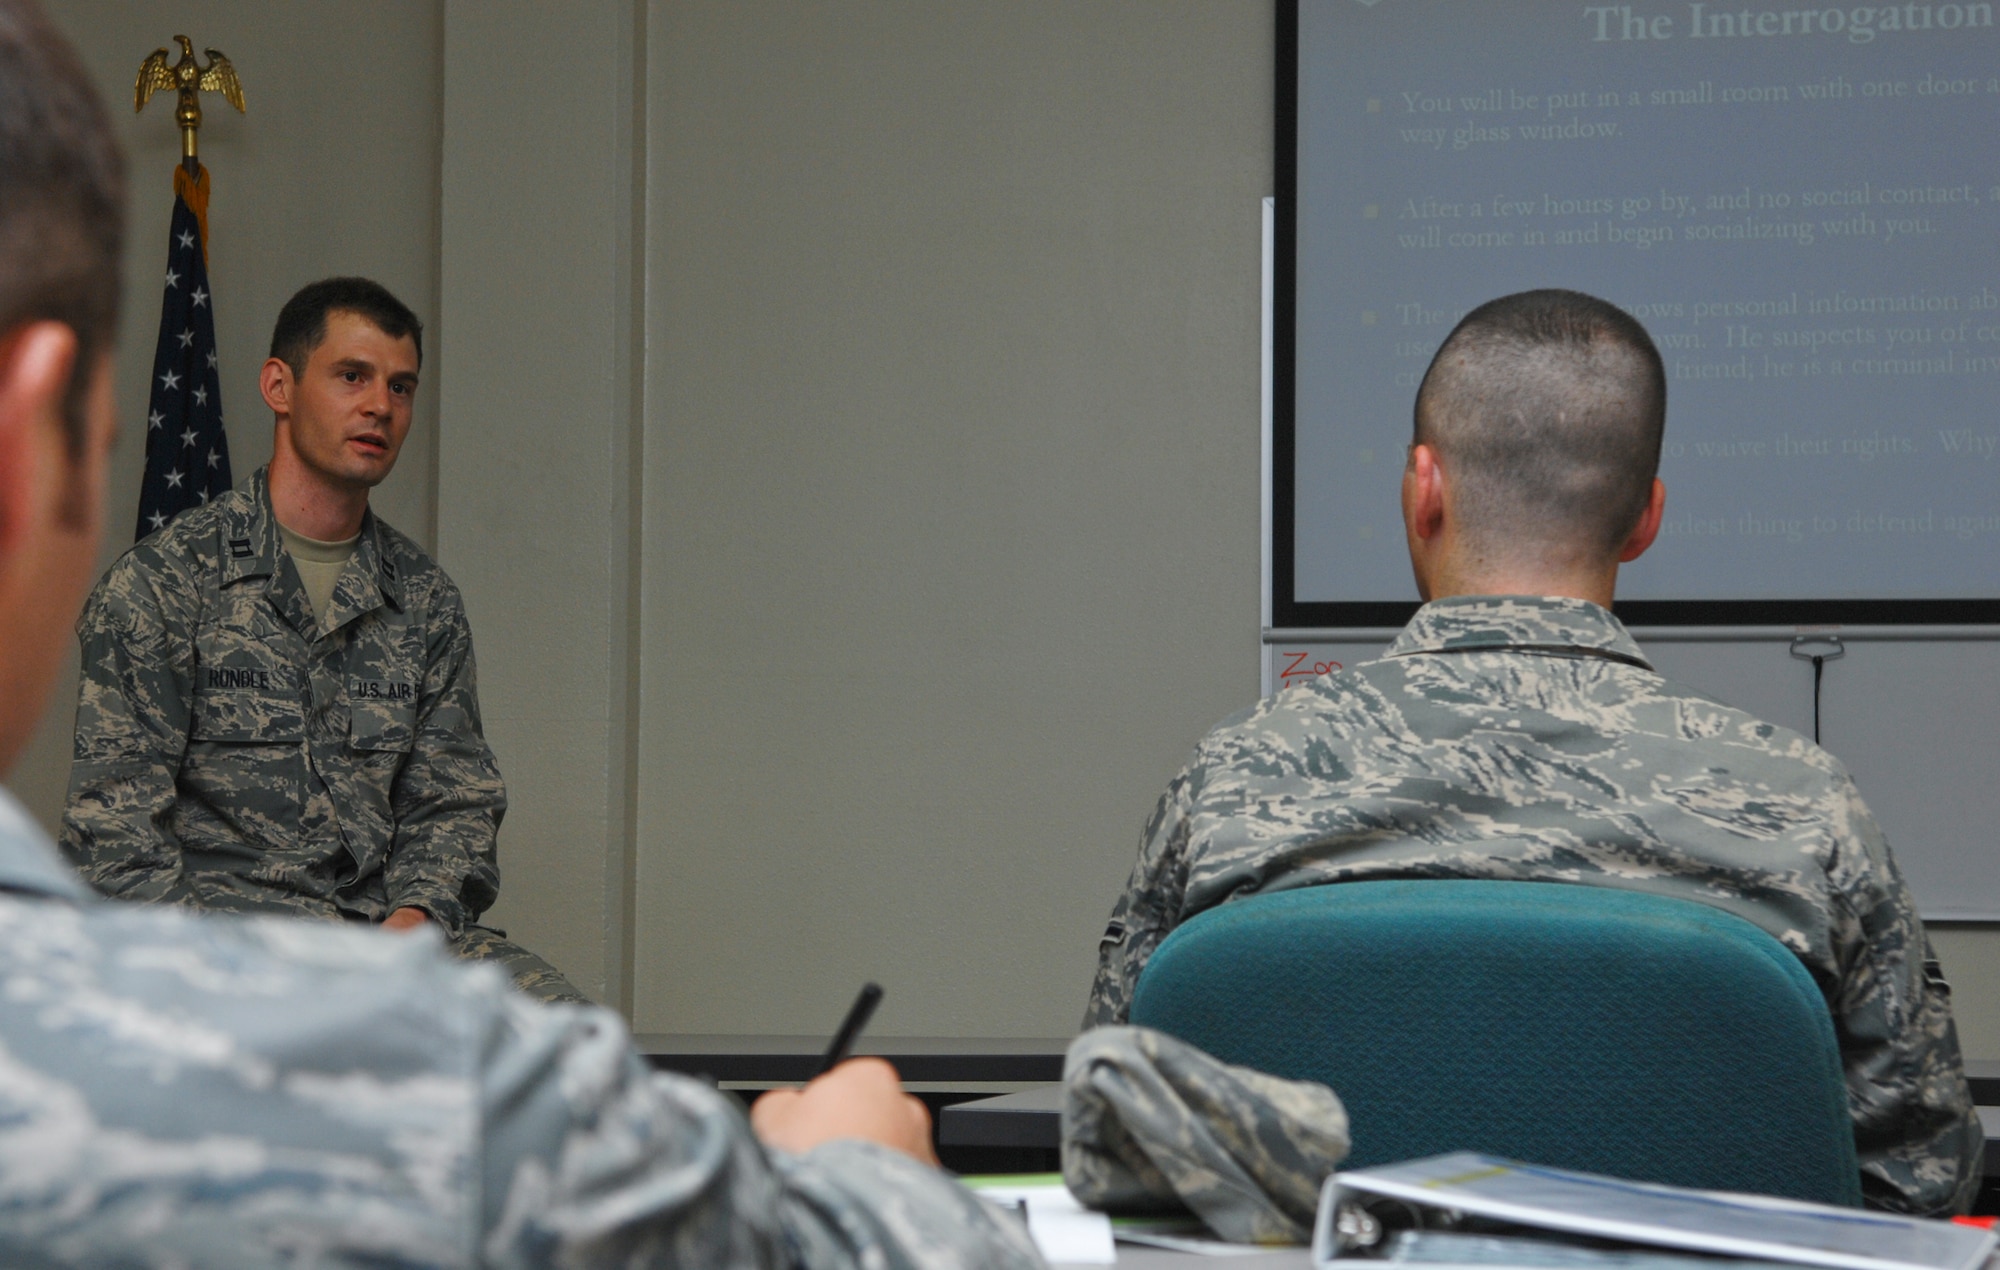 ELMENDORF AIR FORCE BASE, Alaska -- Capt. Seth Rundle briefs Airmen in the First Term Airman's Center here about the Area Defense Counsel mission. Rundle is Elmendorf's Area Defense Counsel. (U.S. Air Force photo/Senior Airman David Carbajal)